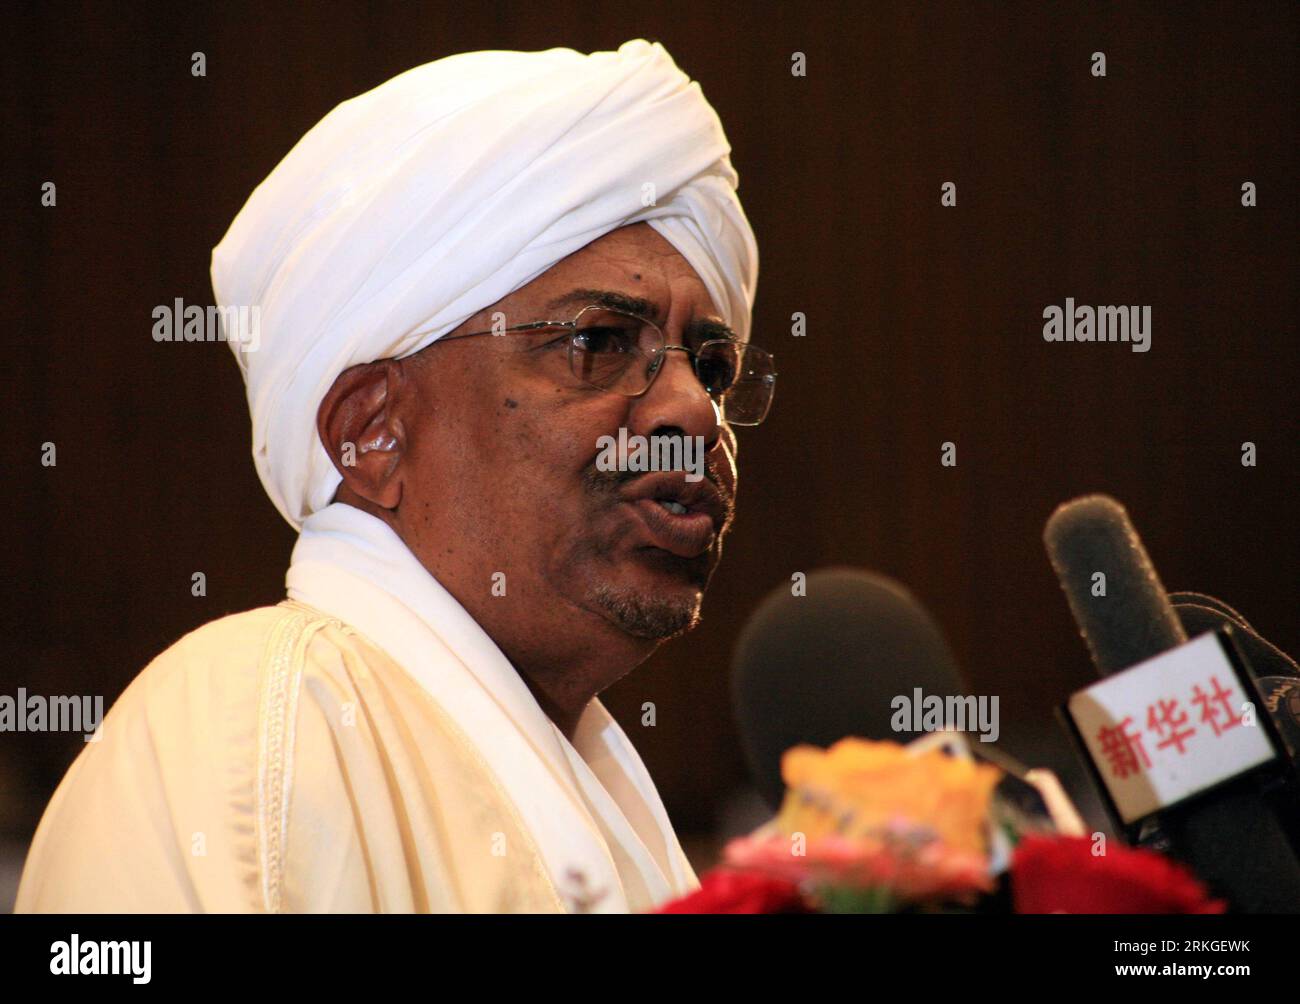 110712 -- KHARTOUM, July 12, 2011 Xinhua -- Sudanese President Omar Hassan al-Bashir delivers a speech at Sudan s parliament in Khartoum on July 12, 2011. Sudanese President Omar Hassan al-Bashir said on Tuesday that the country is planning to launch its own currency in the wake of South Sudan s announcement to replace the Sudanese pound. Xinhua/Mohammed Babiker srb SUDAN-KHARTOUM-POLICY-NEW CURRENCY PUBLICATIONxNOTxINxCHN Stock Photo